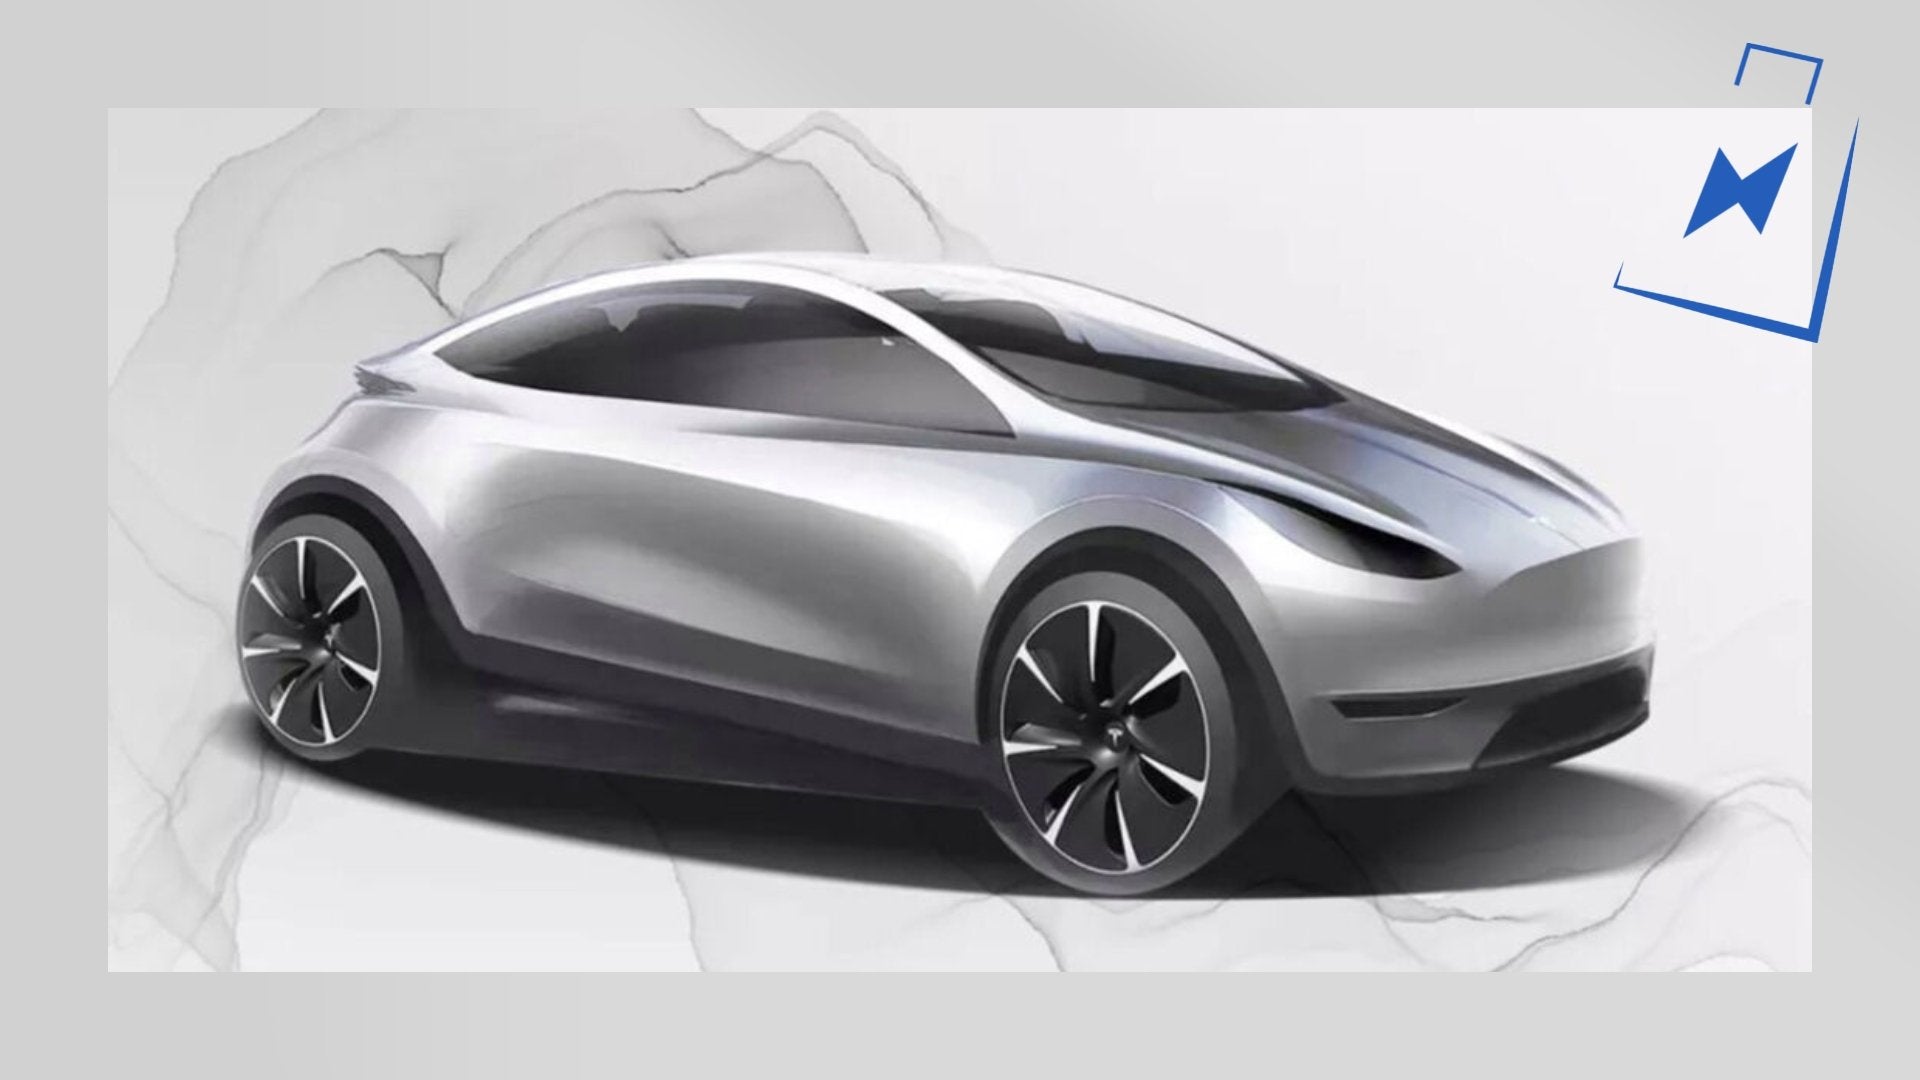 New statements from Elon Musk about the new compact Tesla model. When –  Shop4Tesla